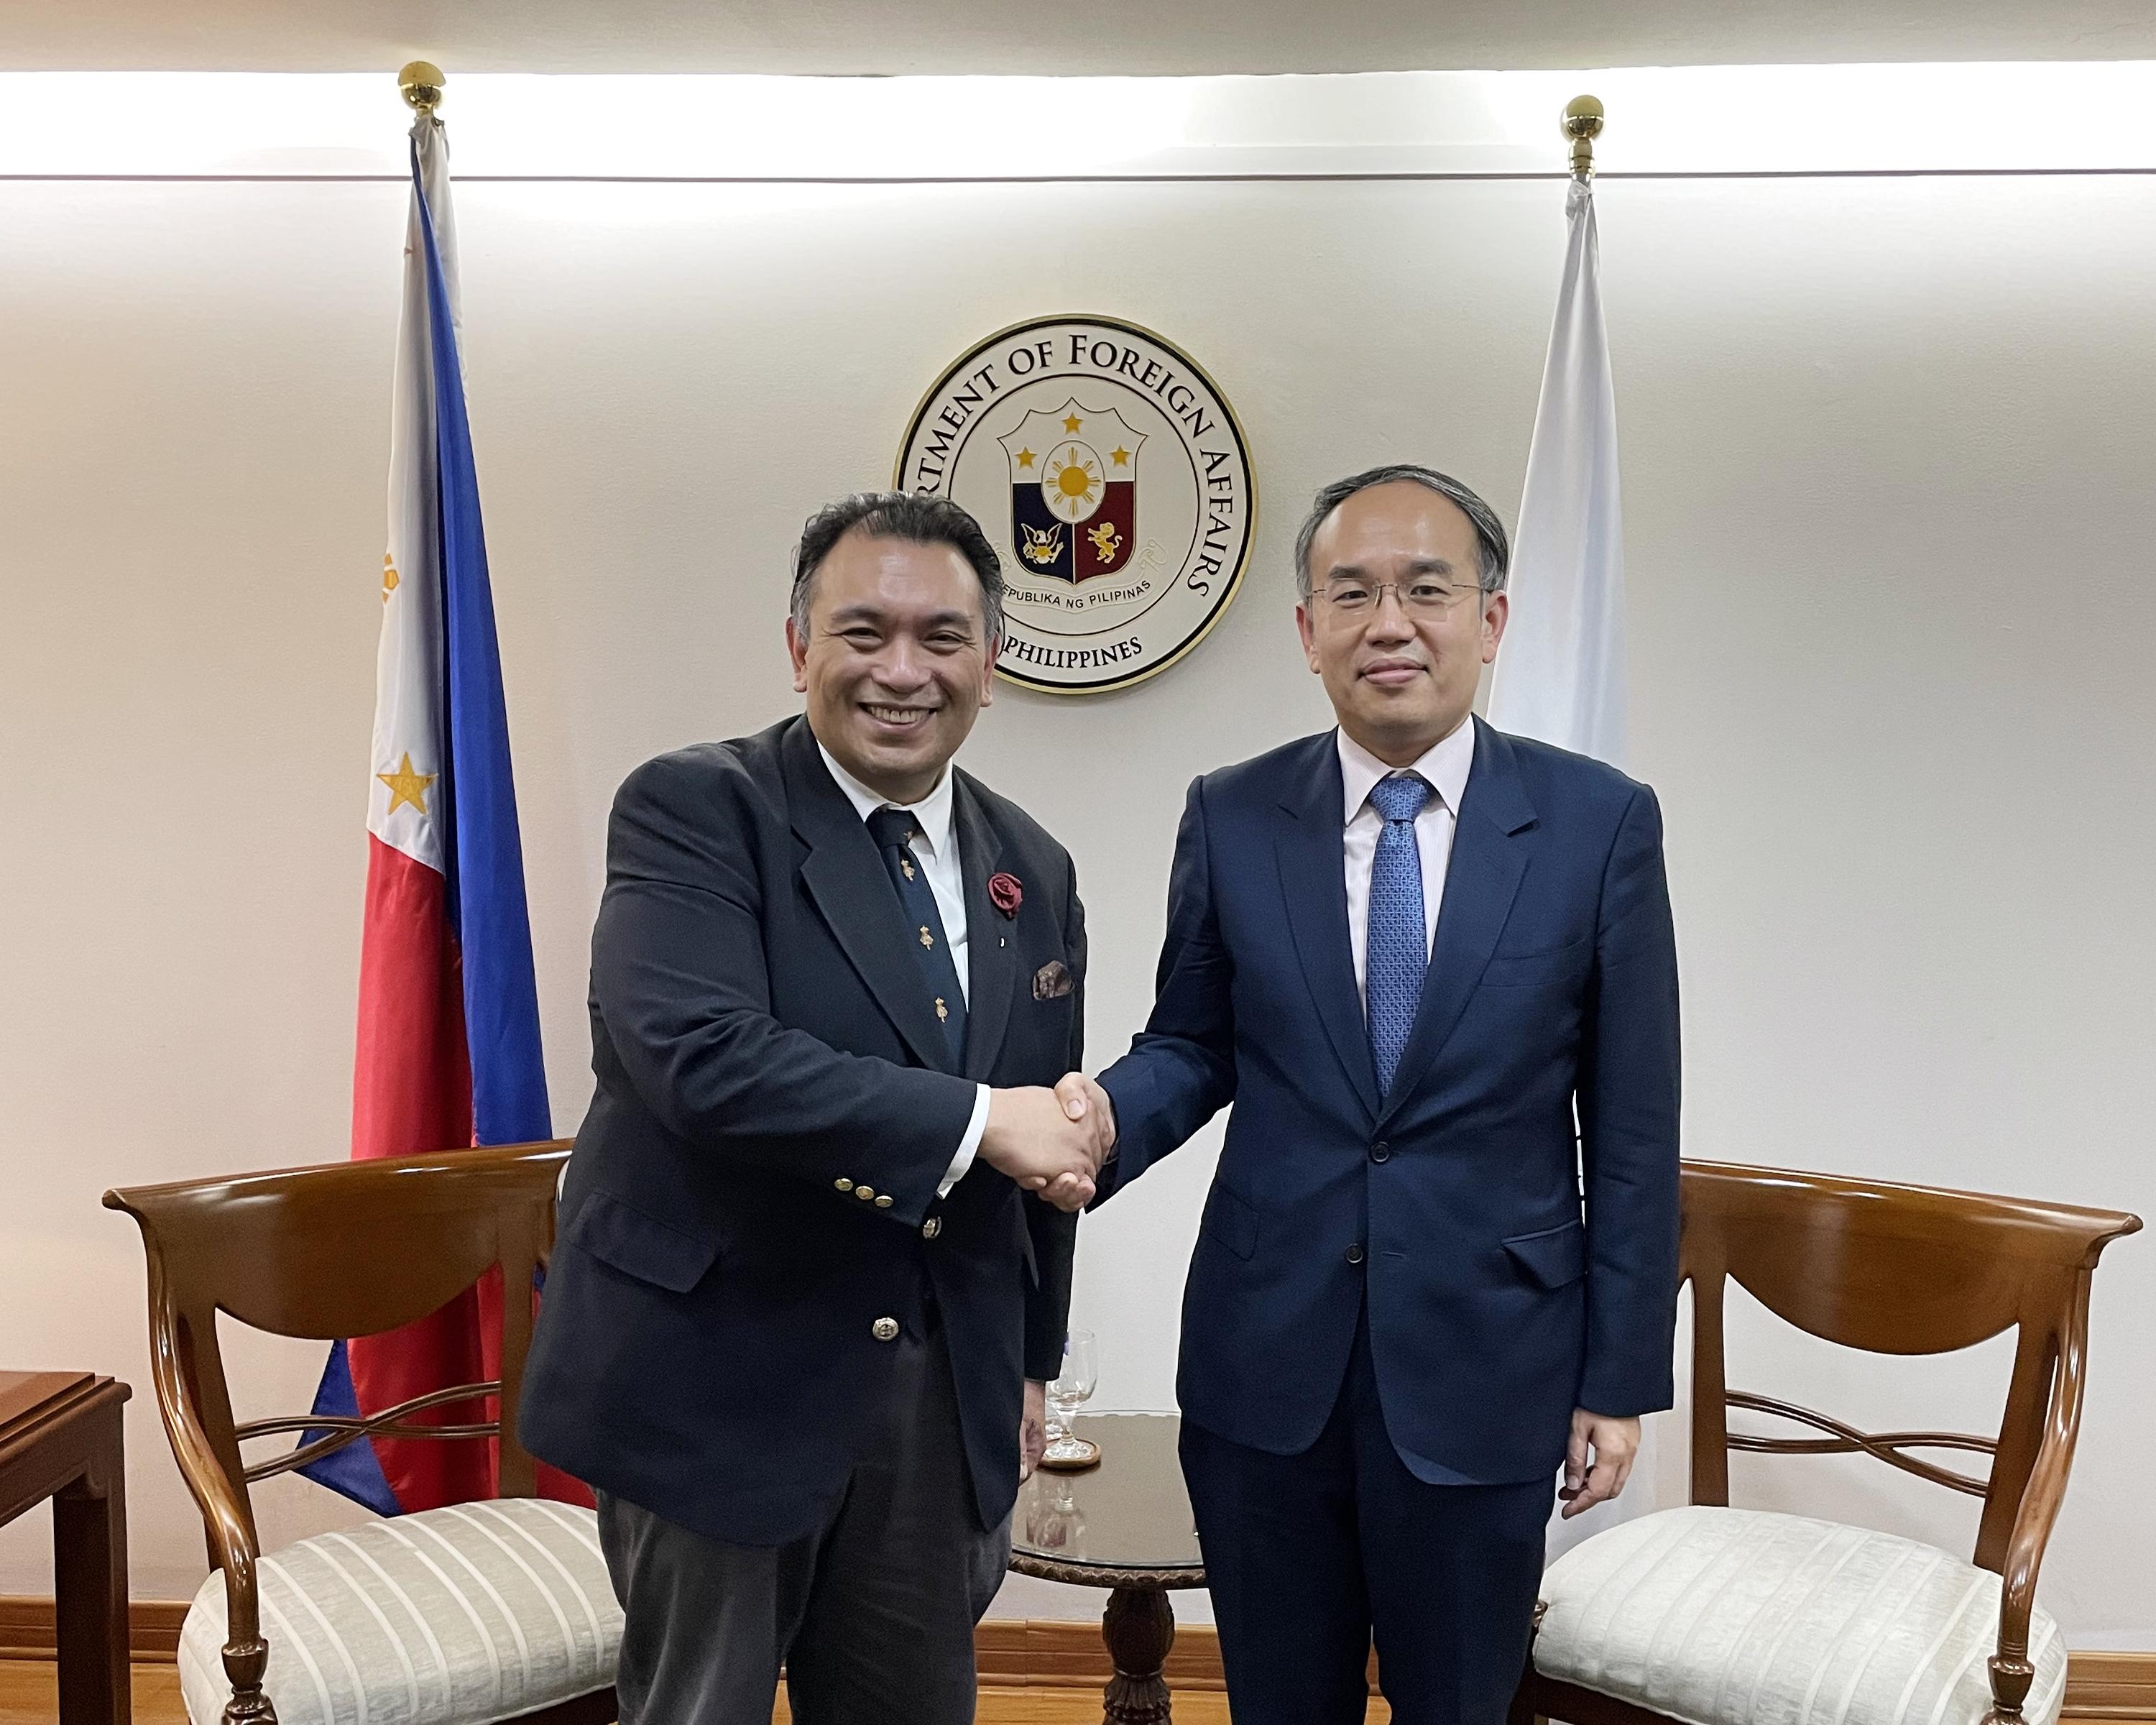 The Secretary for Financial Services and the Treasury, Mr Christopher Hui, today (September 27) continued his visit to Manila, the Philippines. Photo shows Mr Hui (right) meeting with the Undersecretary of Foreign Affairs of the Philippines, Mr Jesus Domingo.

